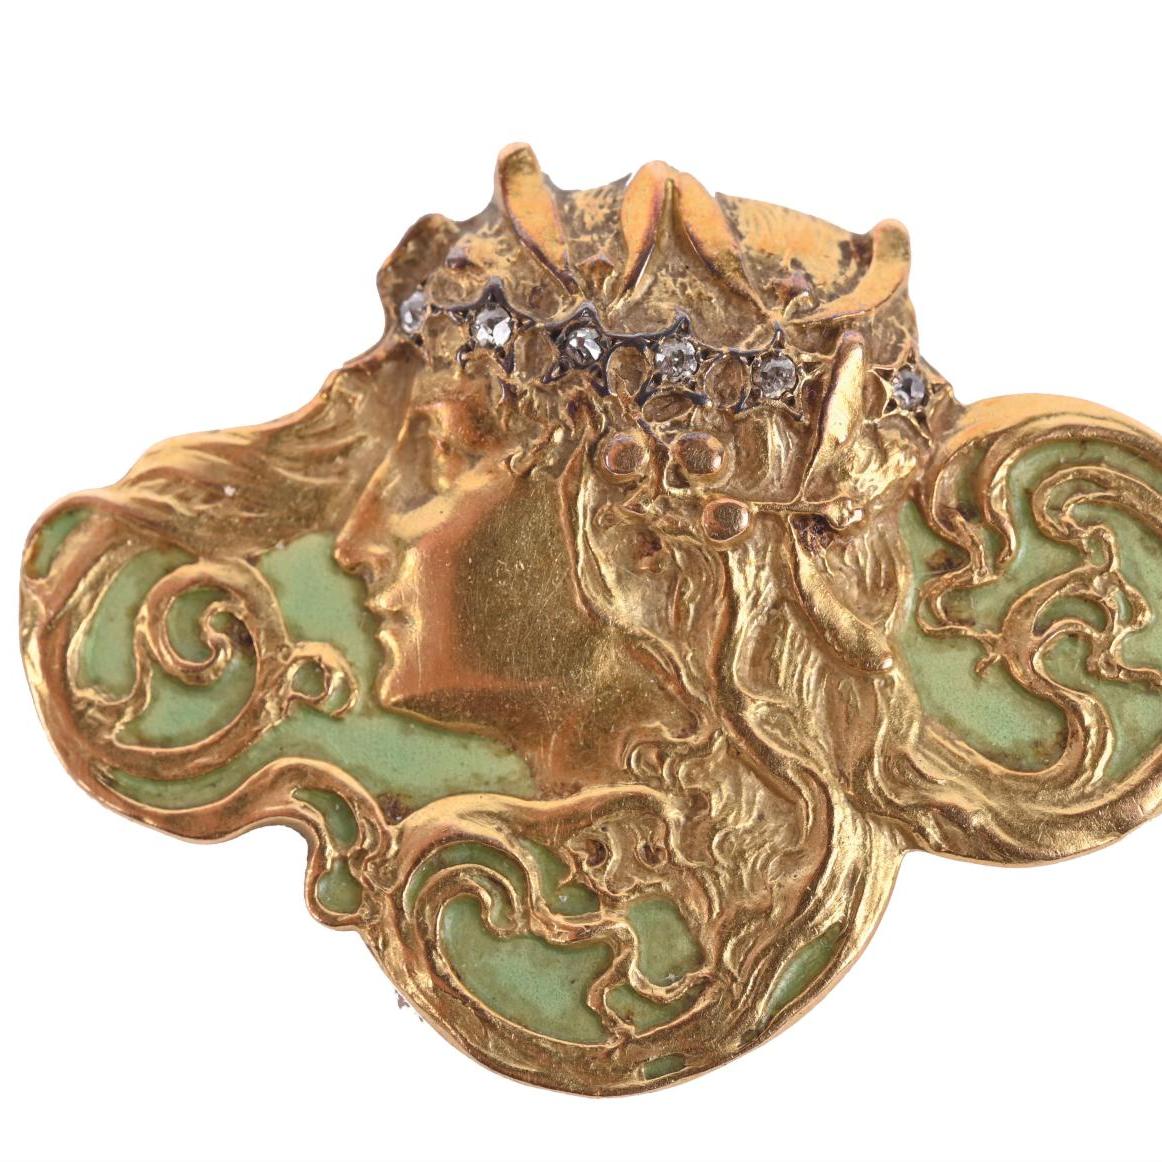 Lalique’s Inspired Art Nouveau Jewelry